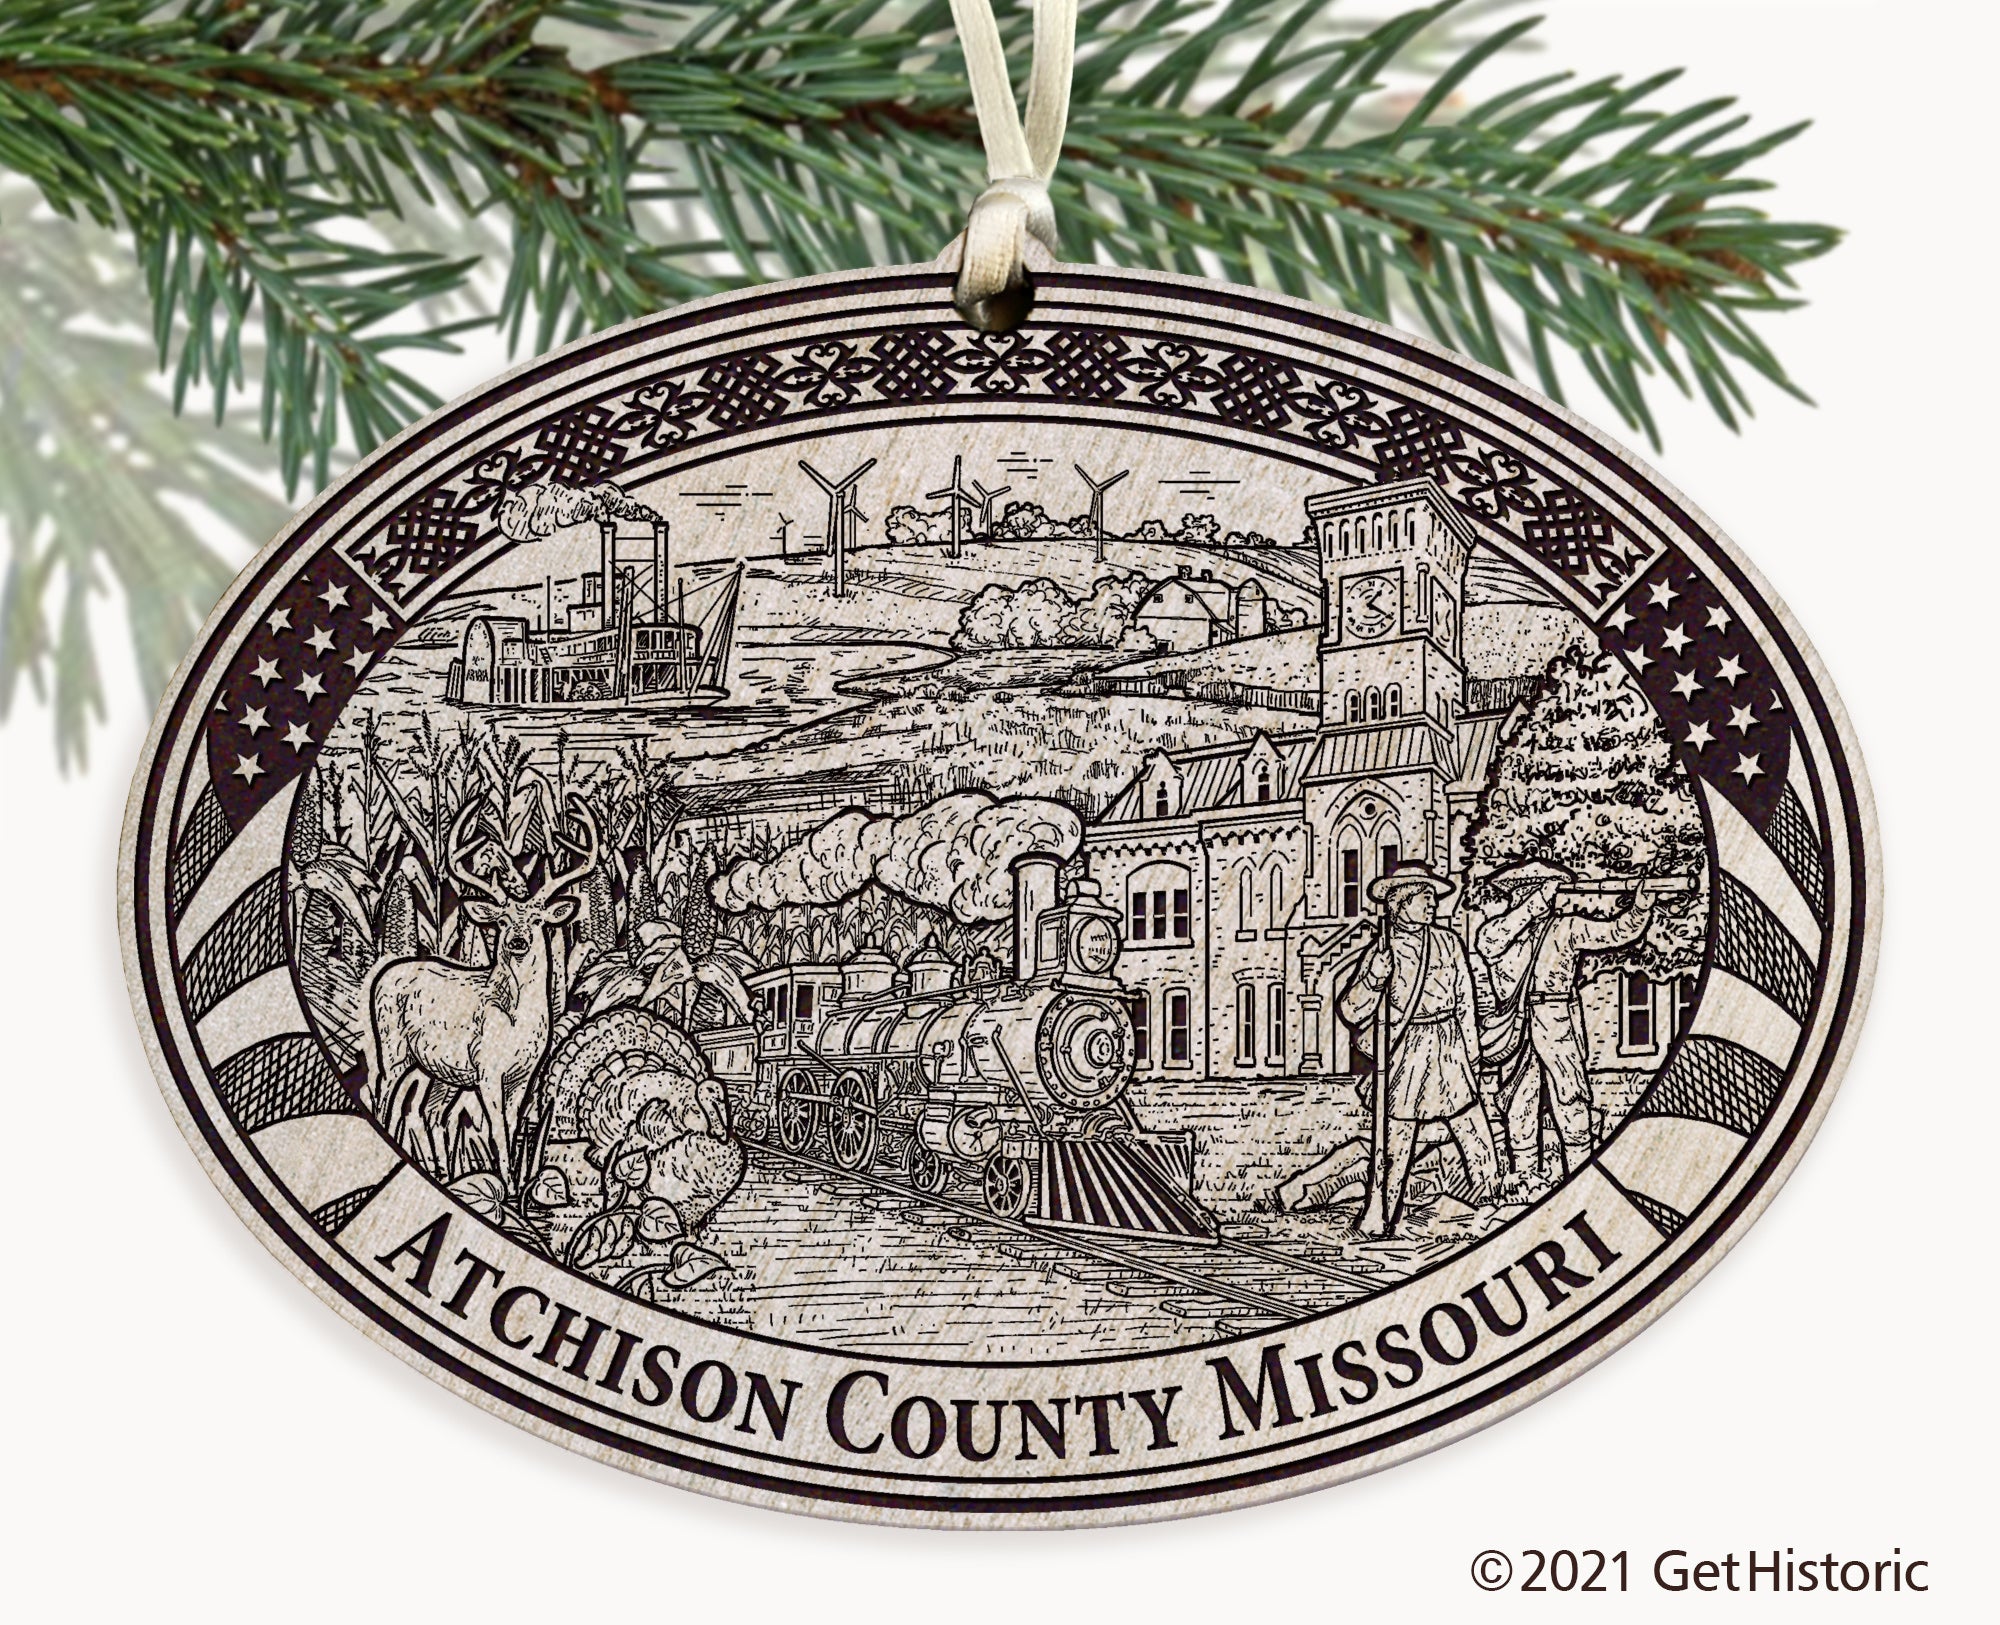 Atchison County Missouri Engraved Ornament